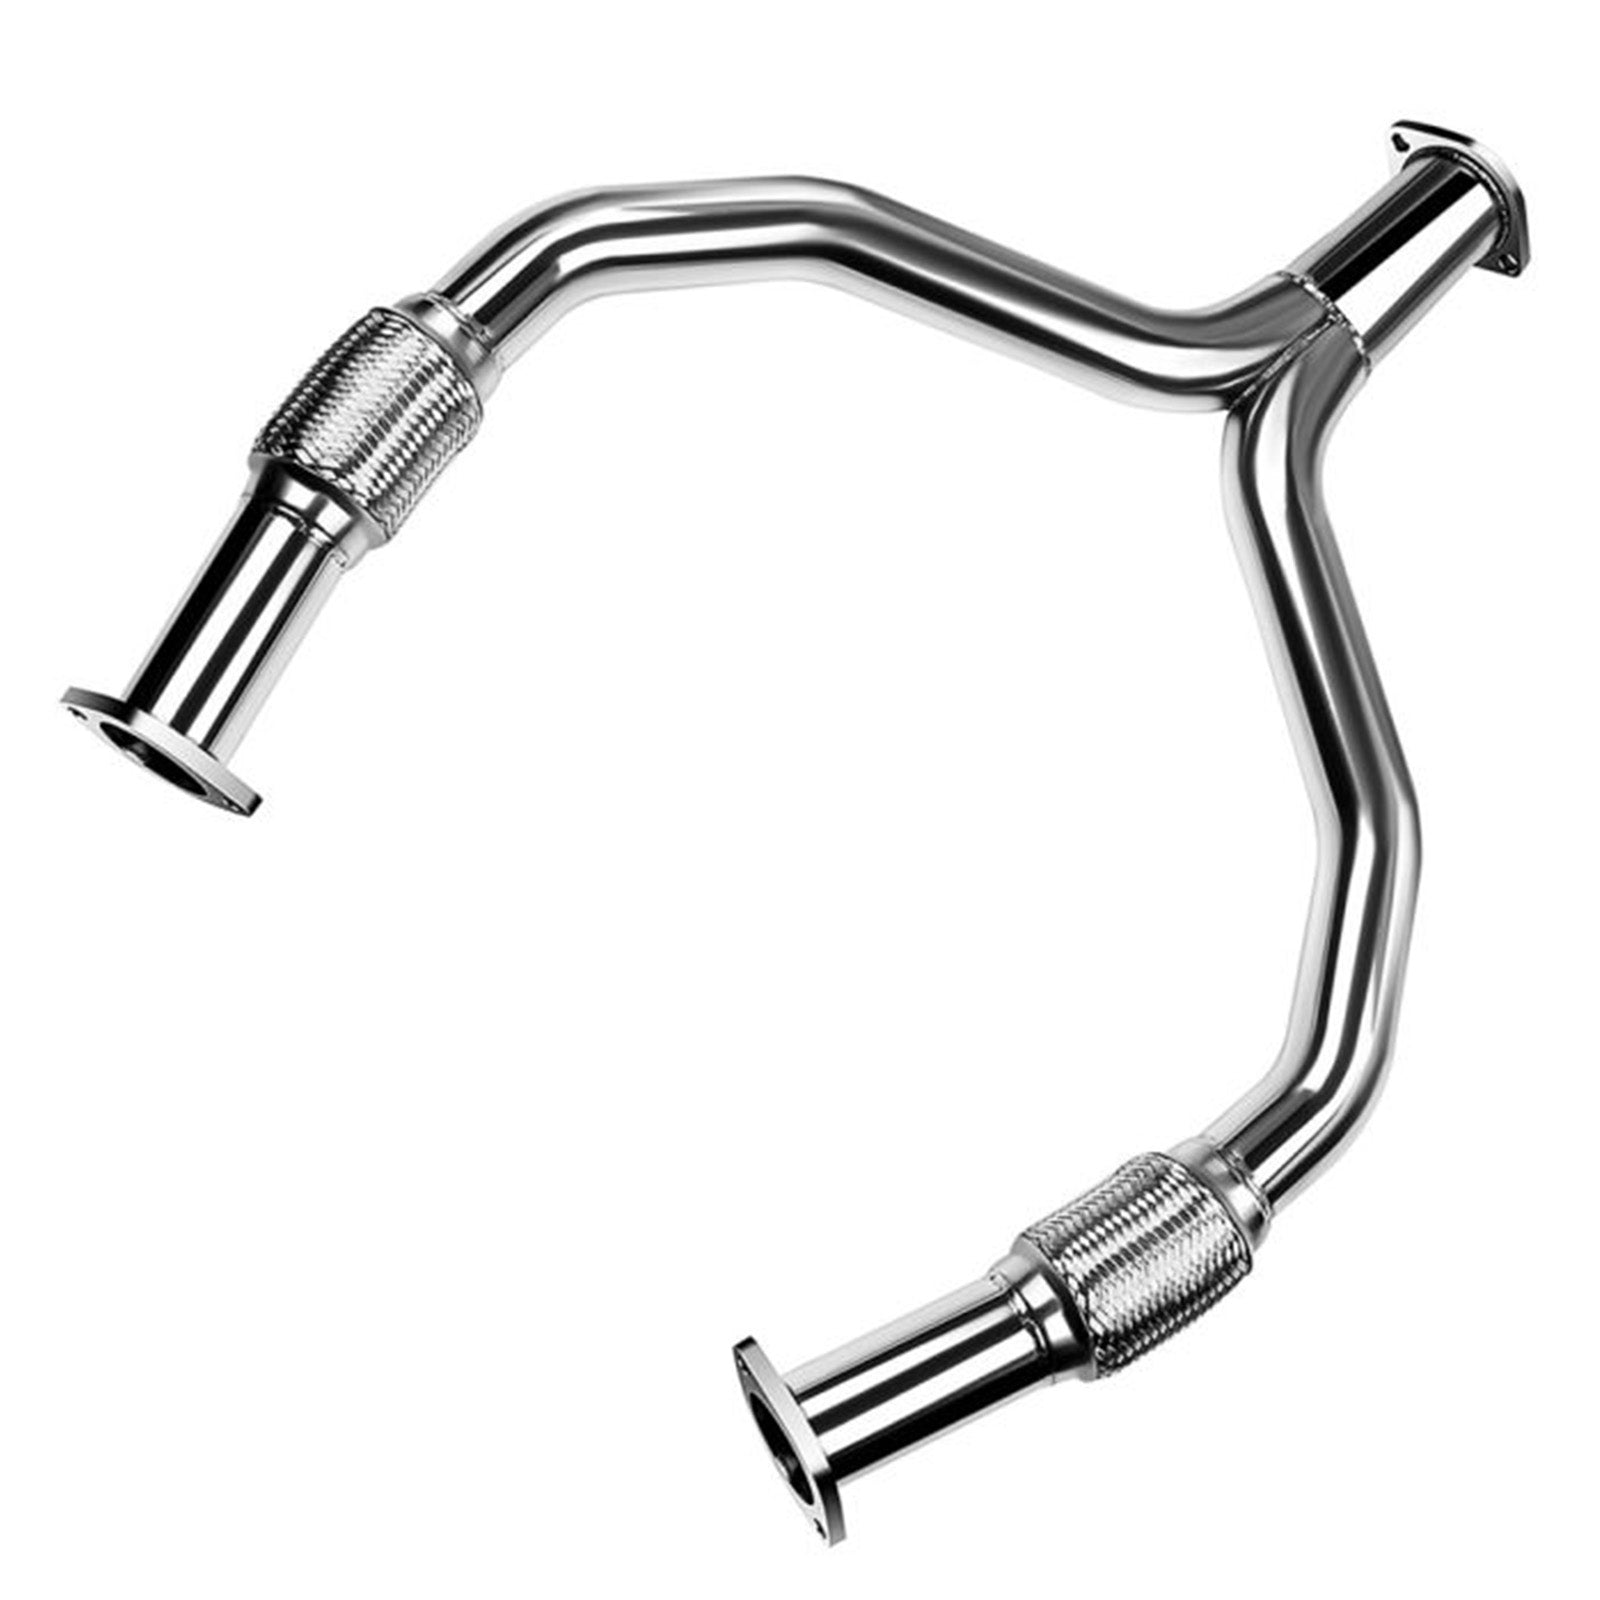 Infiniti 2008-2013 G37 Nissan 2009-2016 370Z 3.7L Stainless Steel Y-Pipe Exhaust Pipe Kit